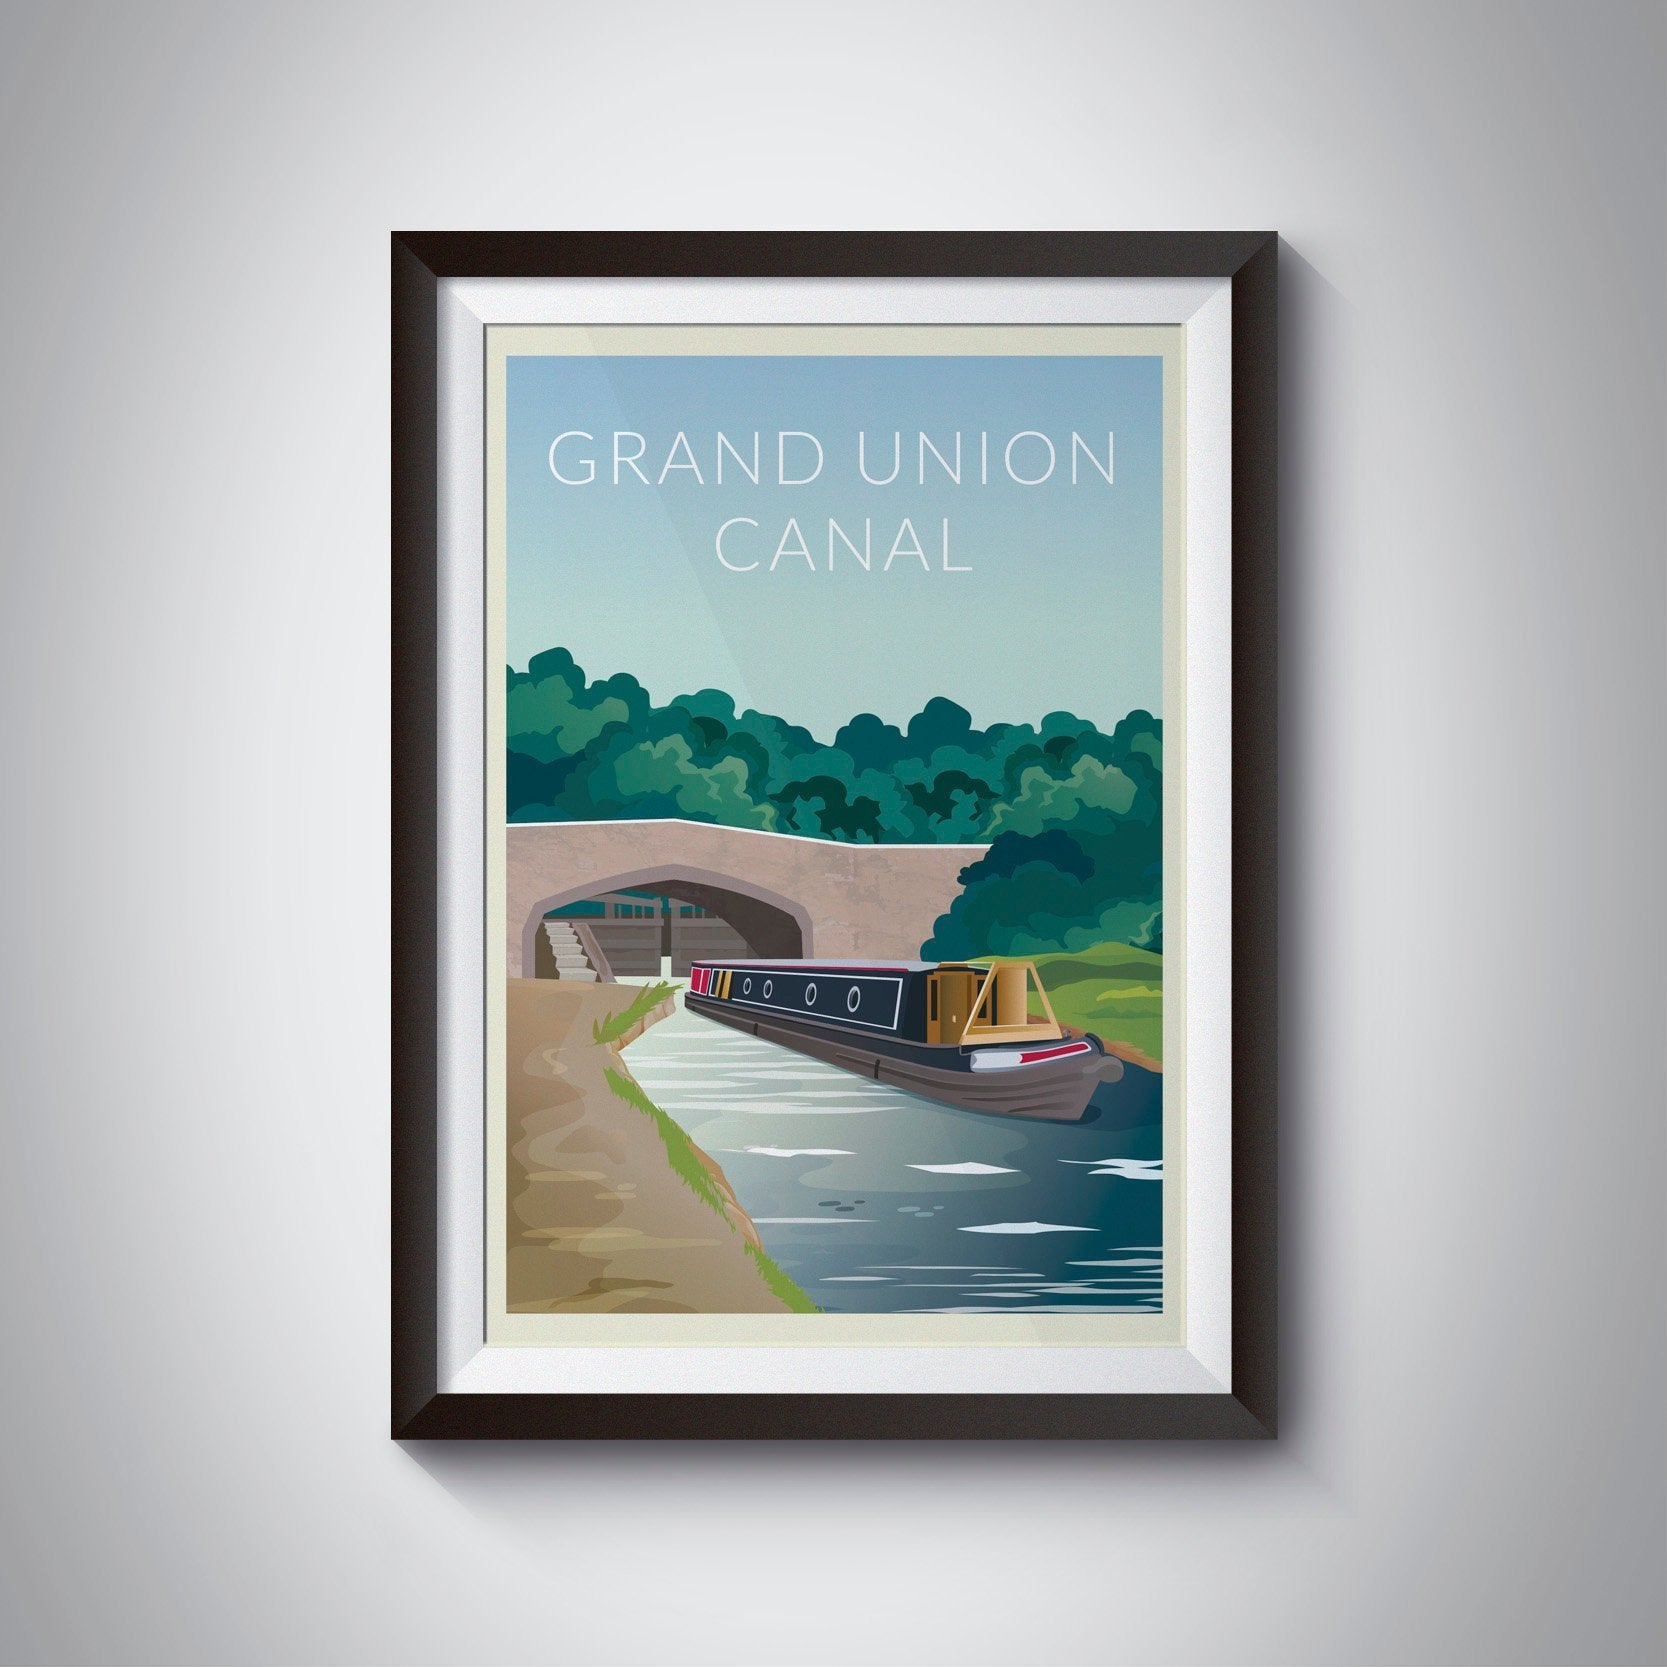 Grand Union Canal Travel Poster